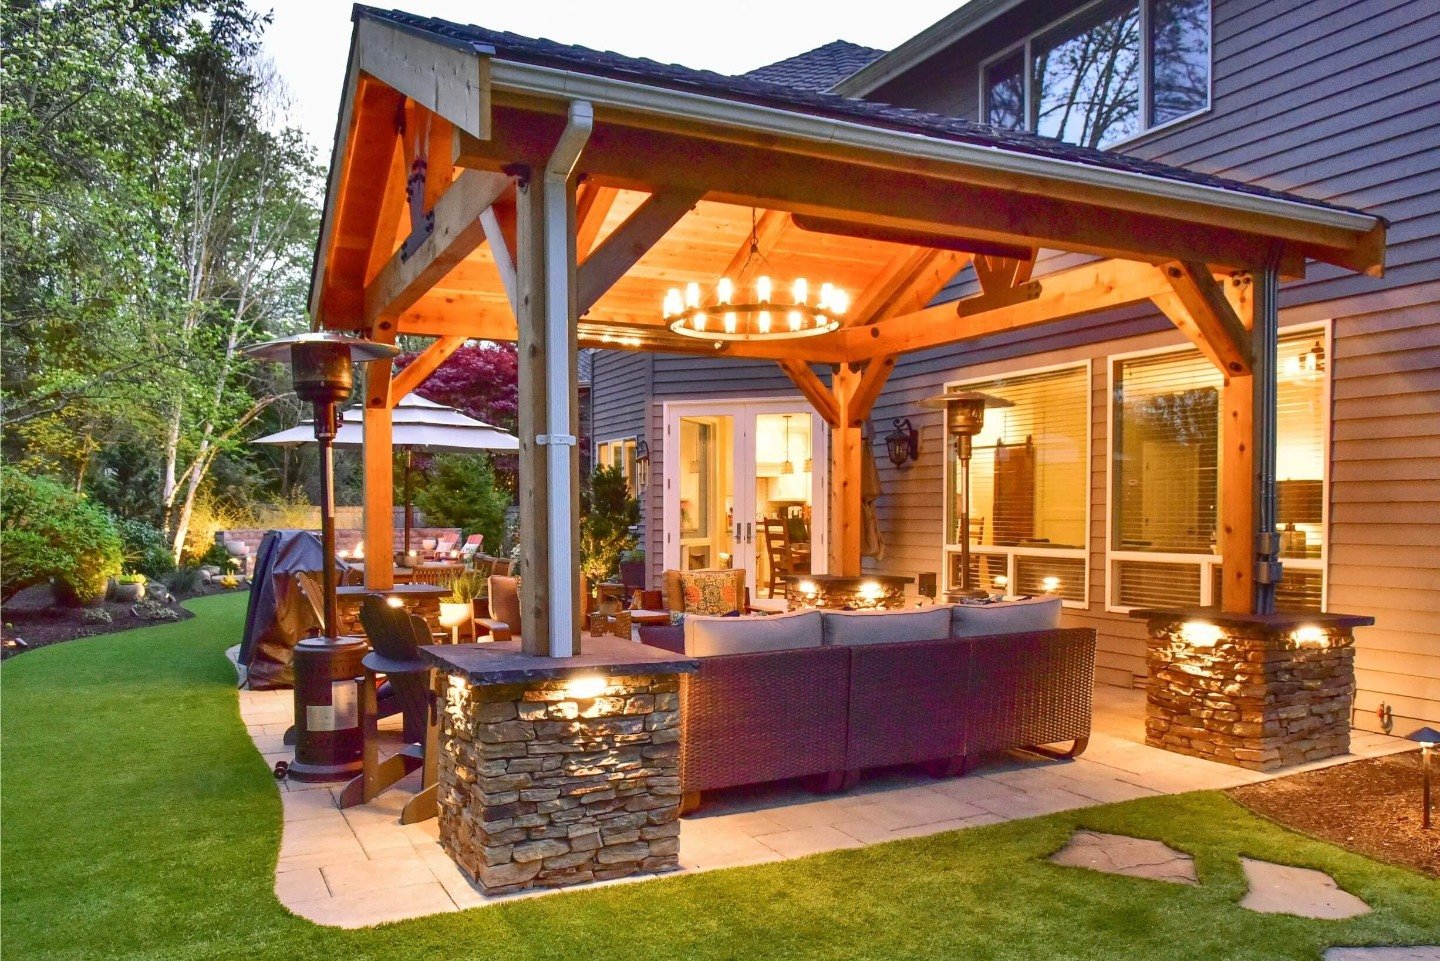 Paver patio with pavilion in Seattle, Washington